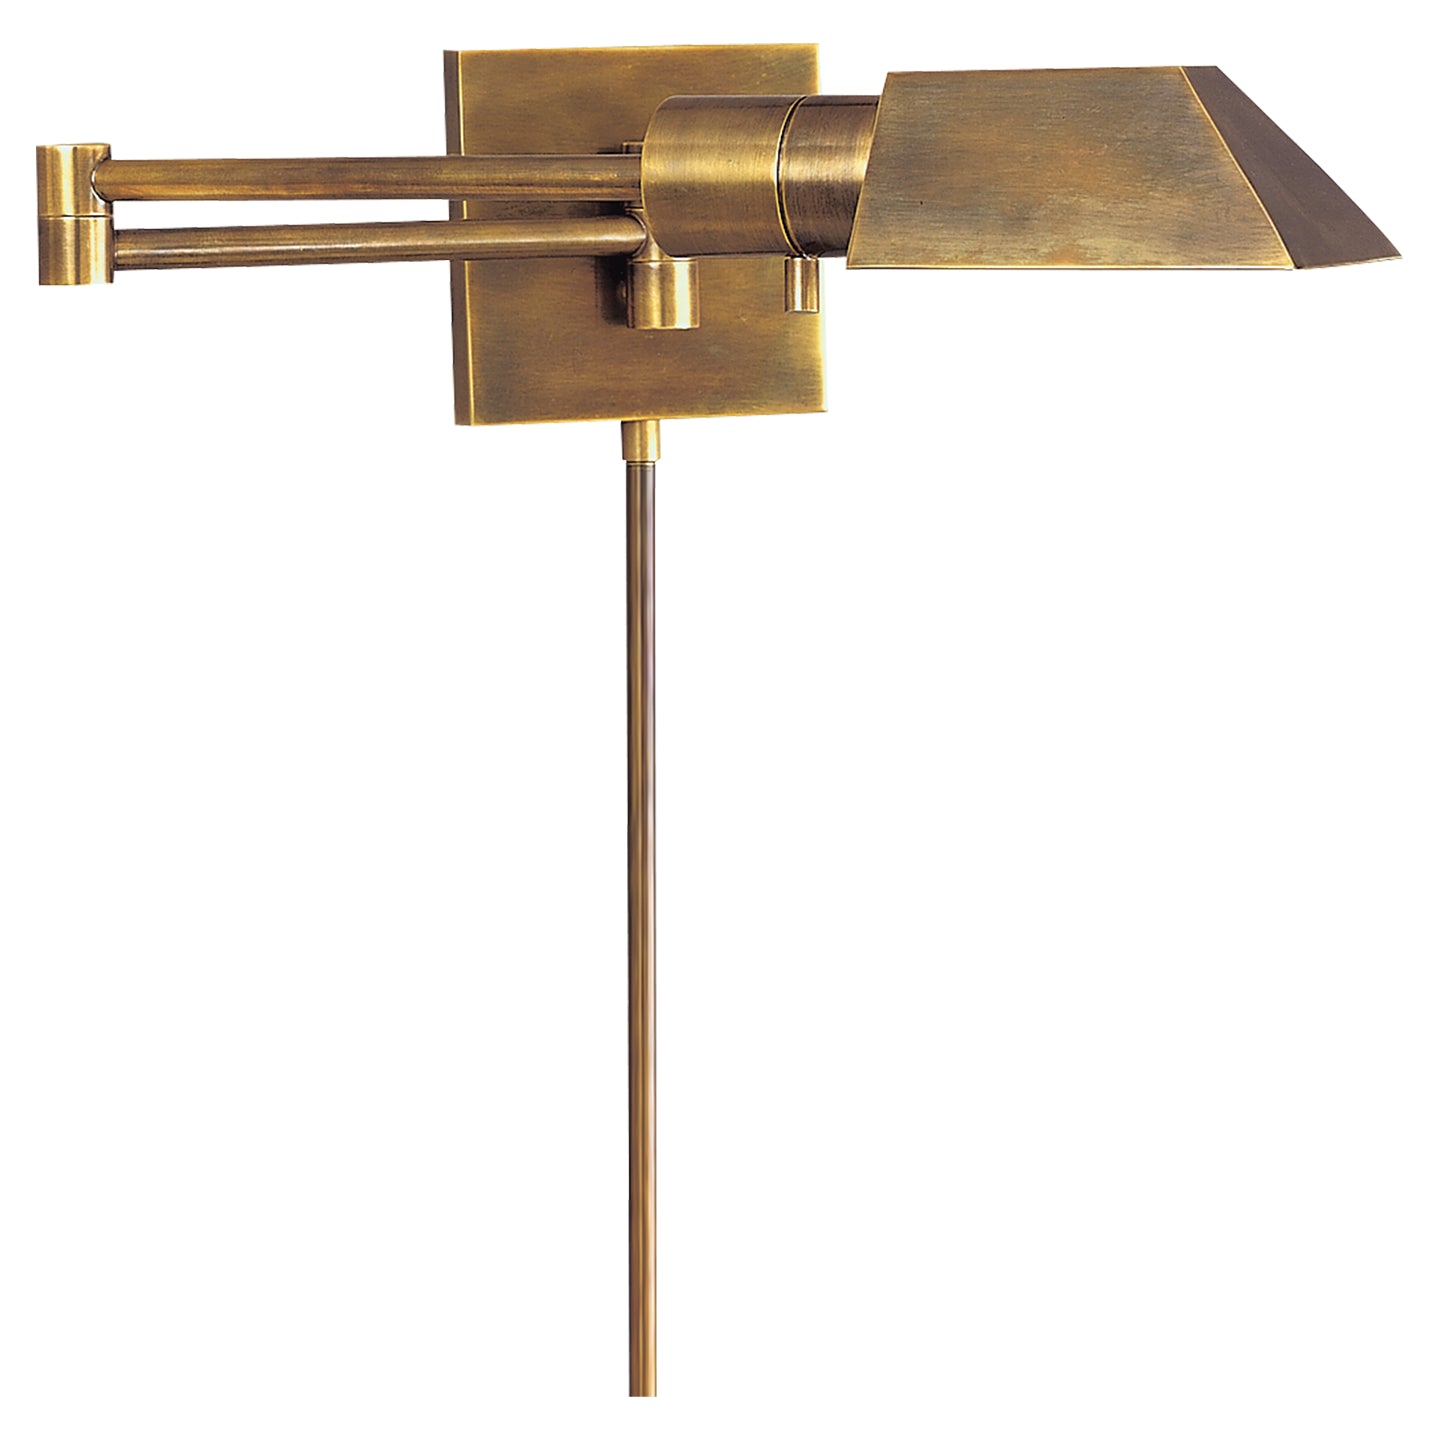 Visual Comfort Signature - 82034 HAB - One Light Swing Arm Wall Lamp - VC CLASSIC - Hand-Rubbed Antique Brass